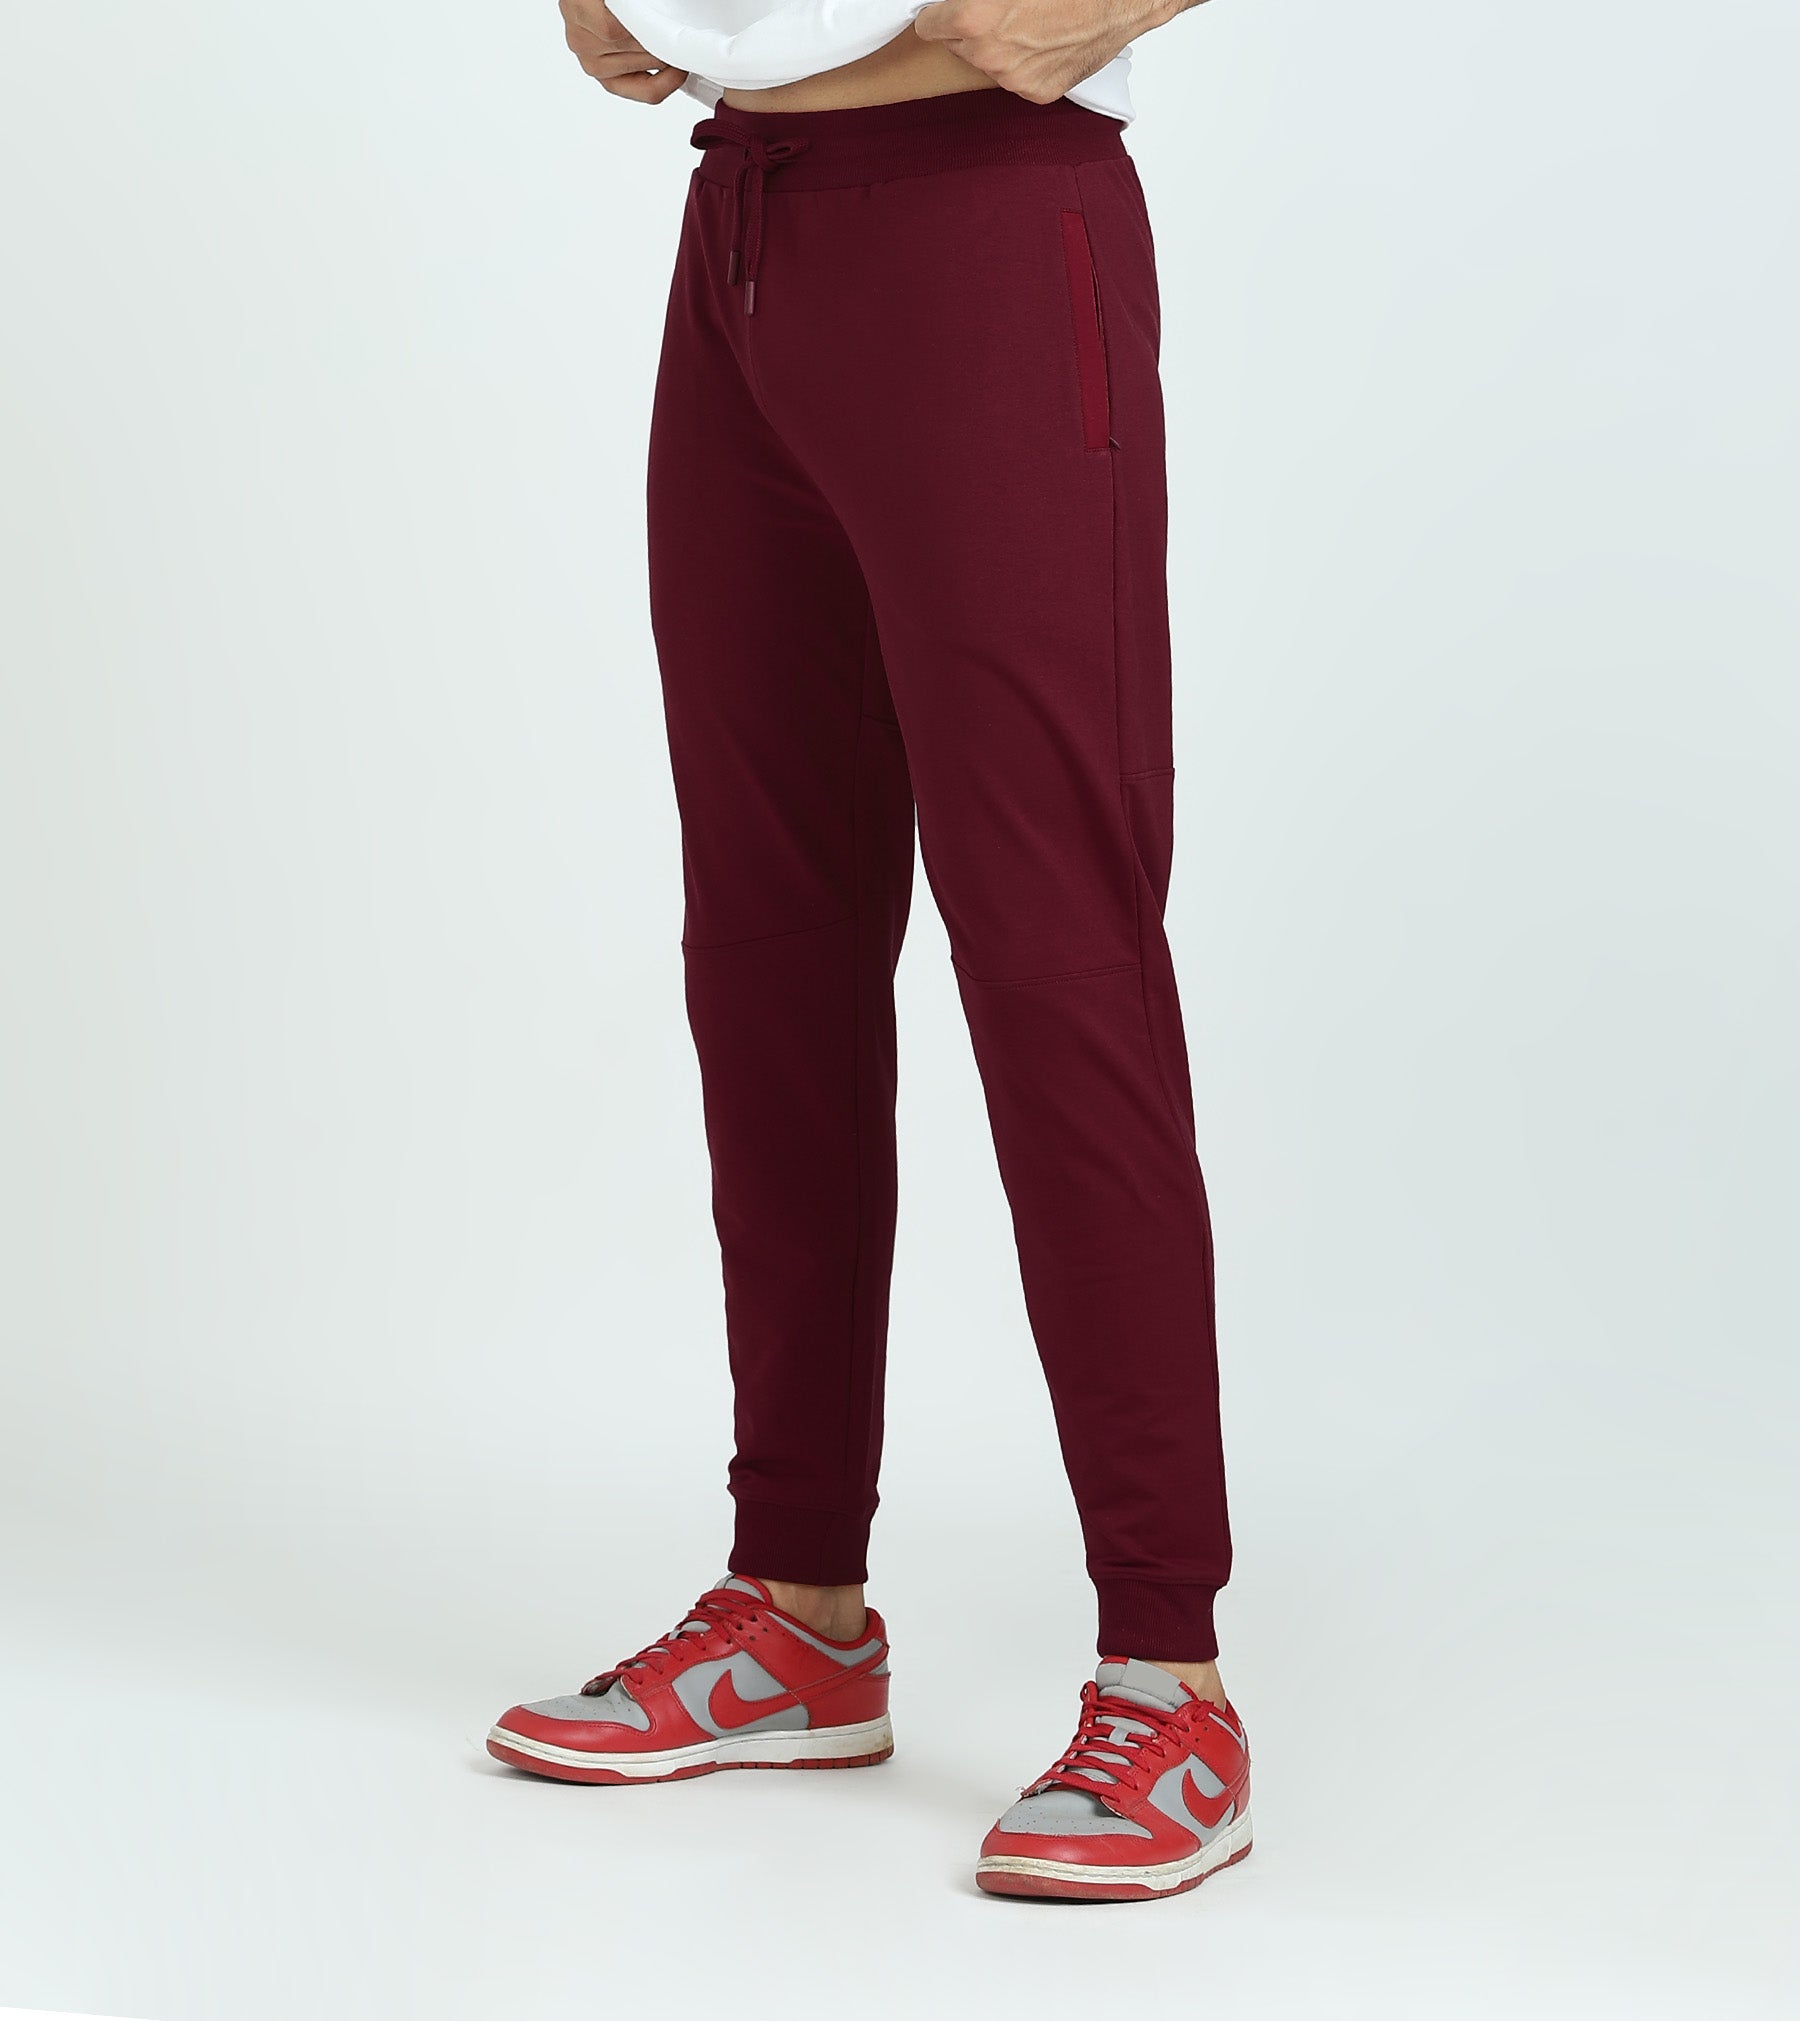 Quest French Terry Cotto-Blend Sweatshirt And Joggers Co-ord Set For Men Scarlet Red - XYXX Mens Apparels